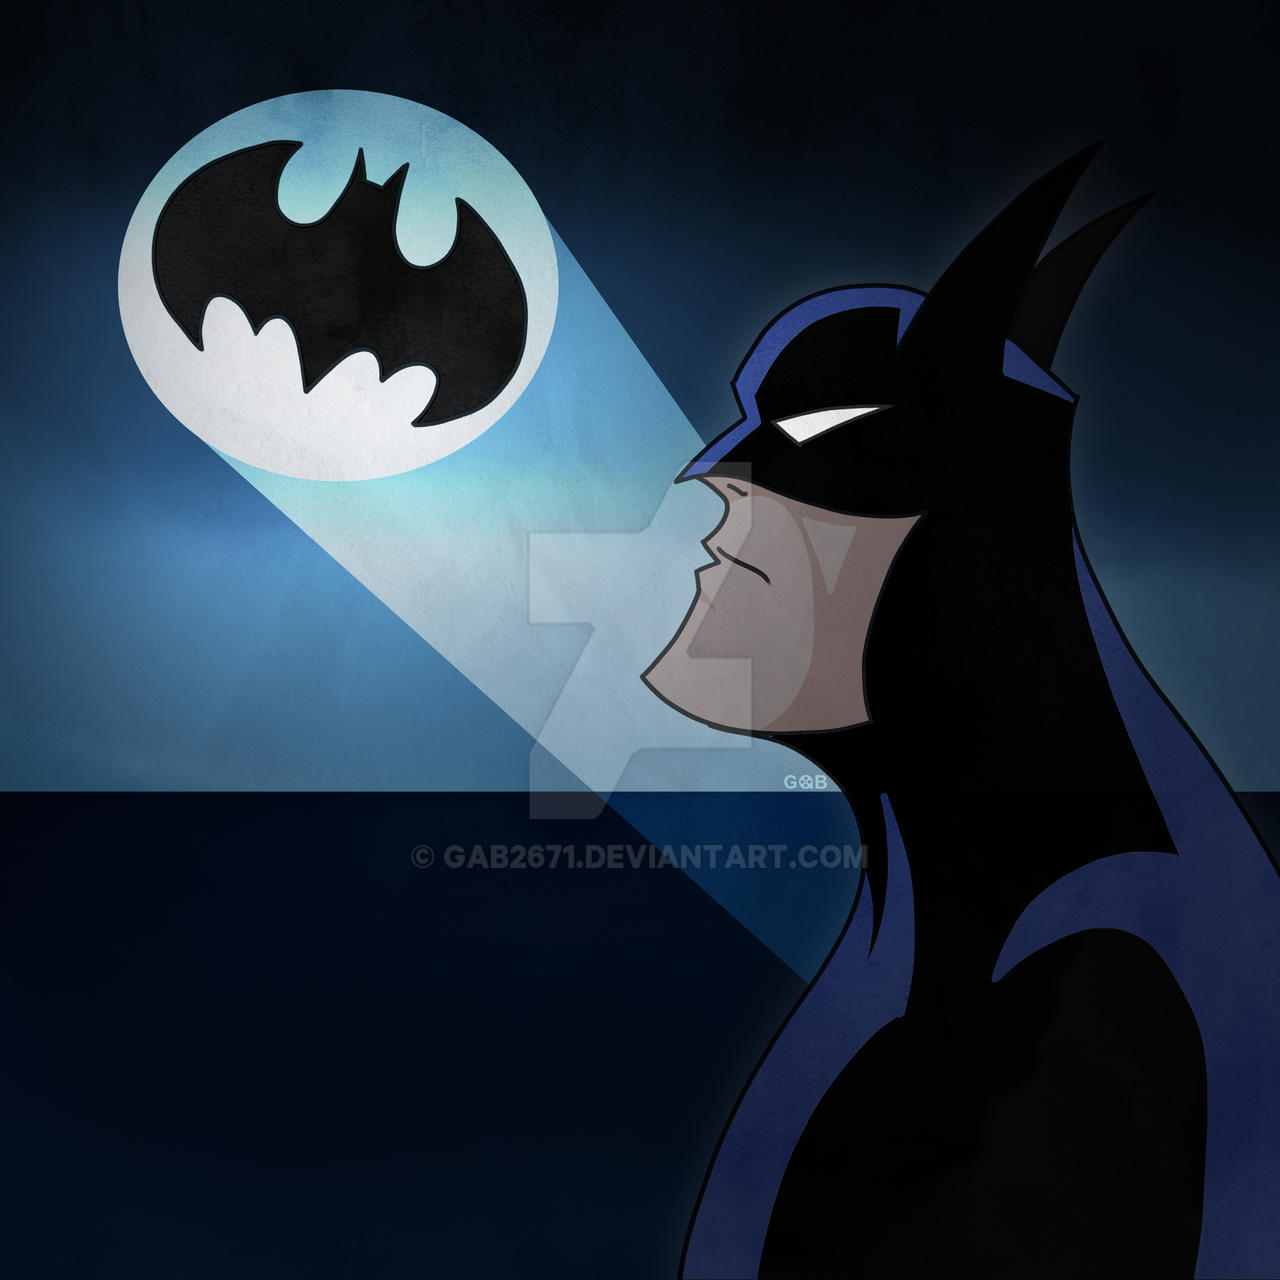 RIP Kevin Conroy by DingoPatagonico on DeviantArt